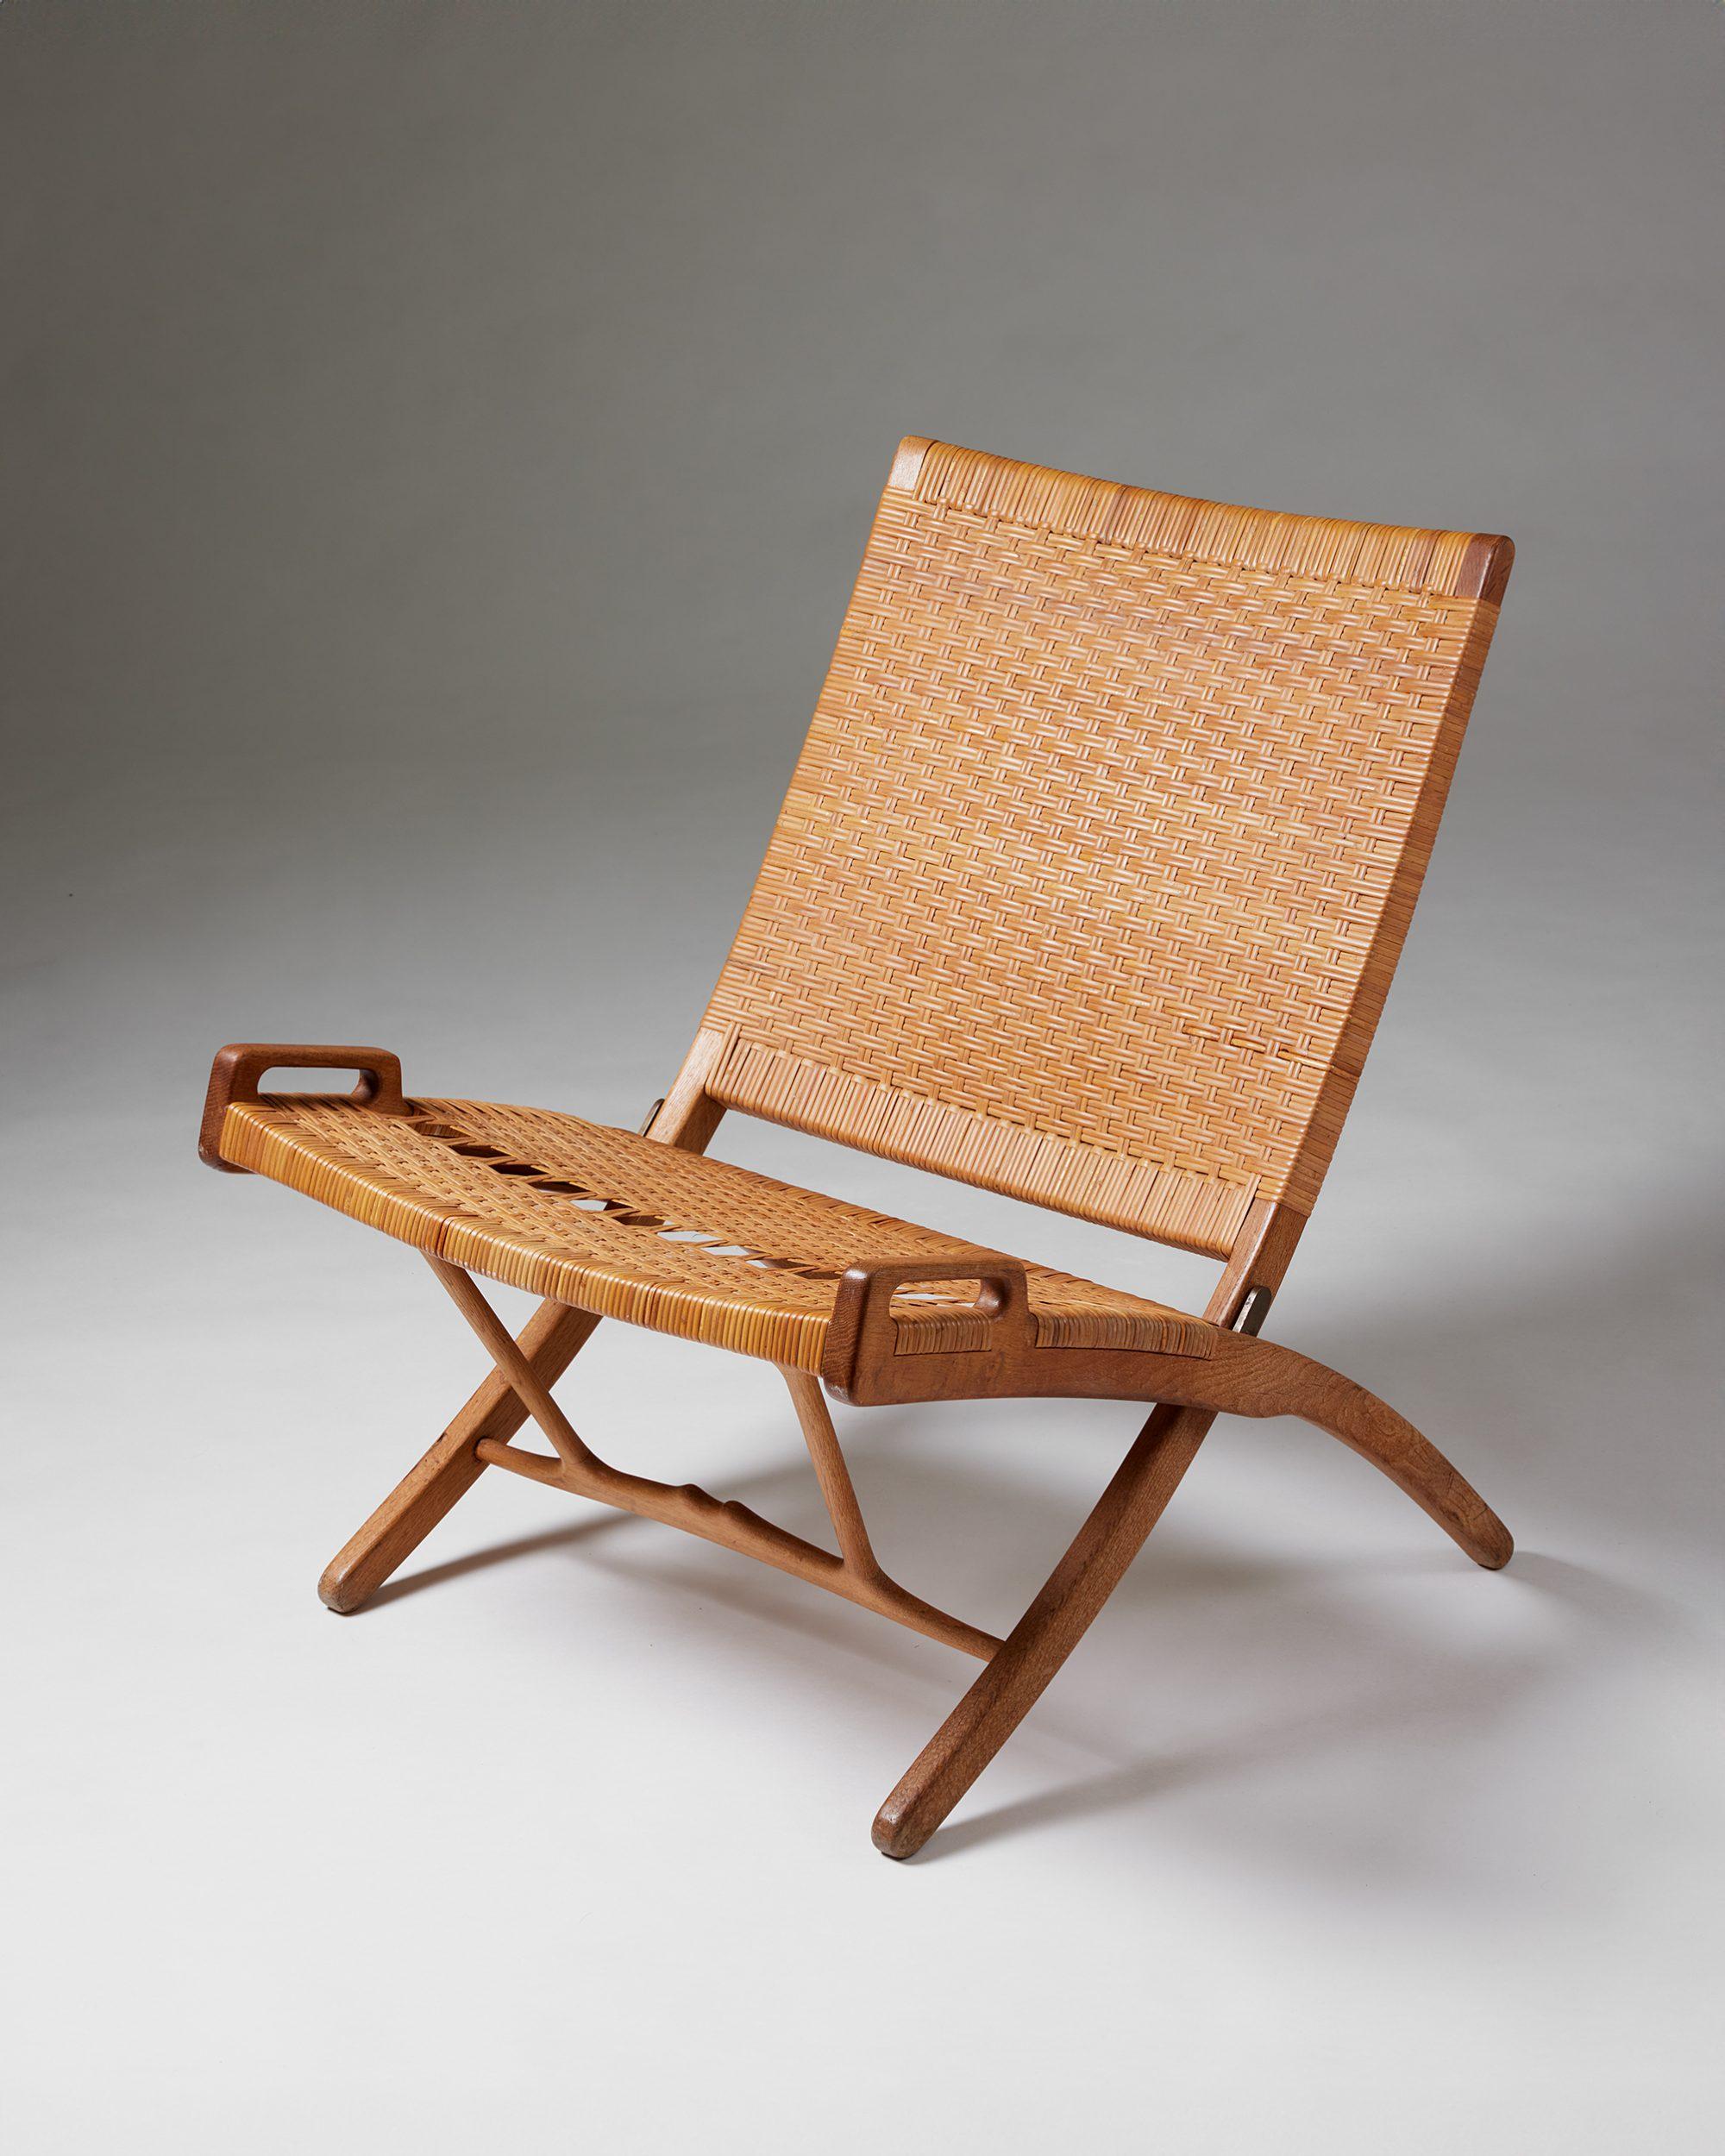 Hans J. Wegner is the father of Danish design and is well known for creating some of the most iconic chairs of the past 100 years. The son of a cobbler, Wegner brought Danish design to the international stage through his deep understanding and